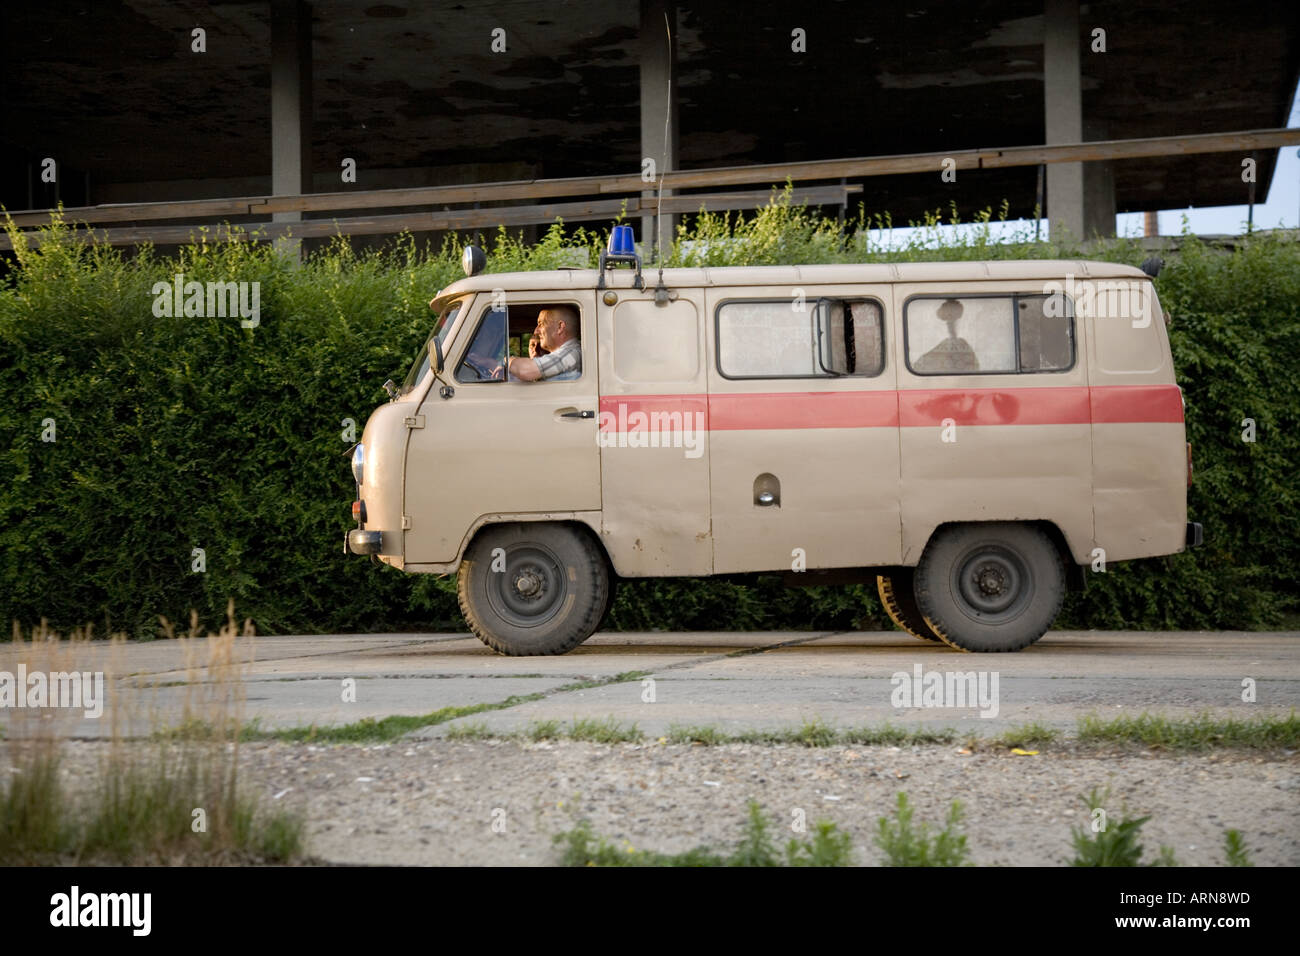 Emergency vehicle in Novosibirsk Siberia Russia Northern Asia July 2006 Stock Photo